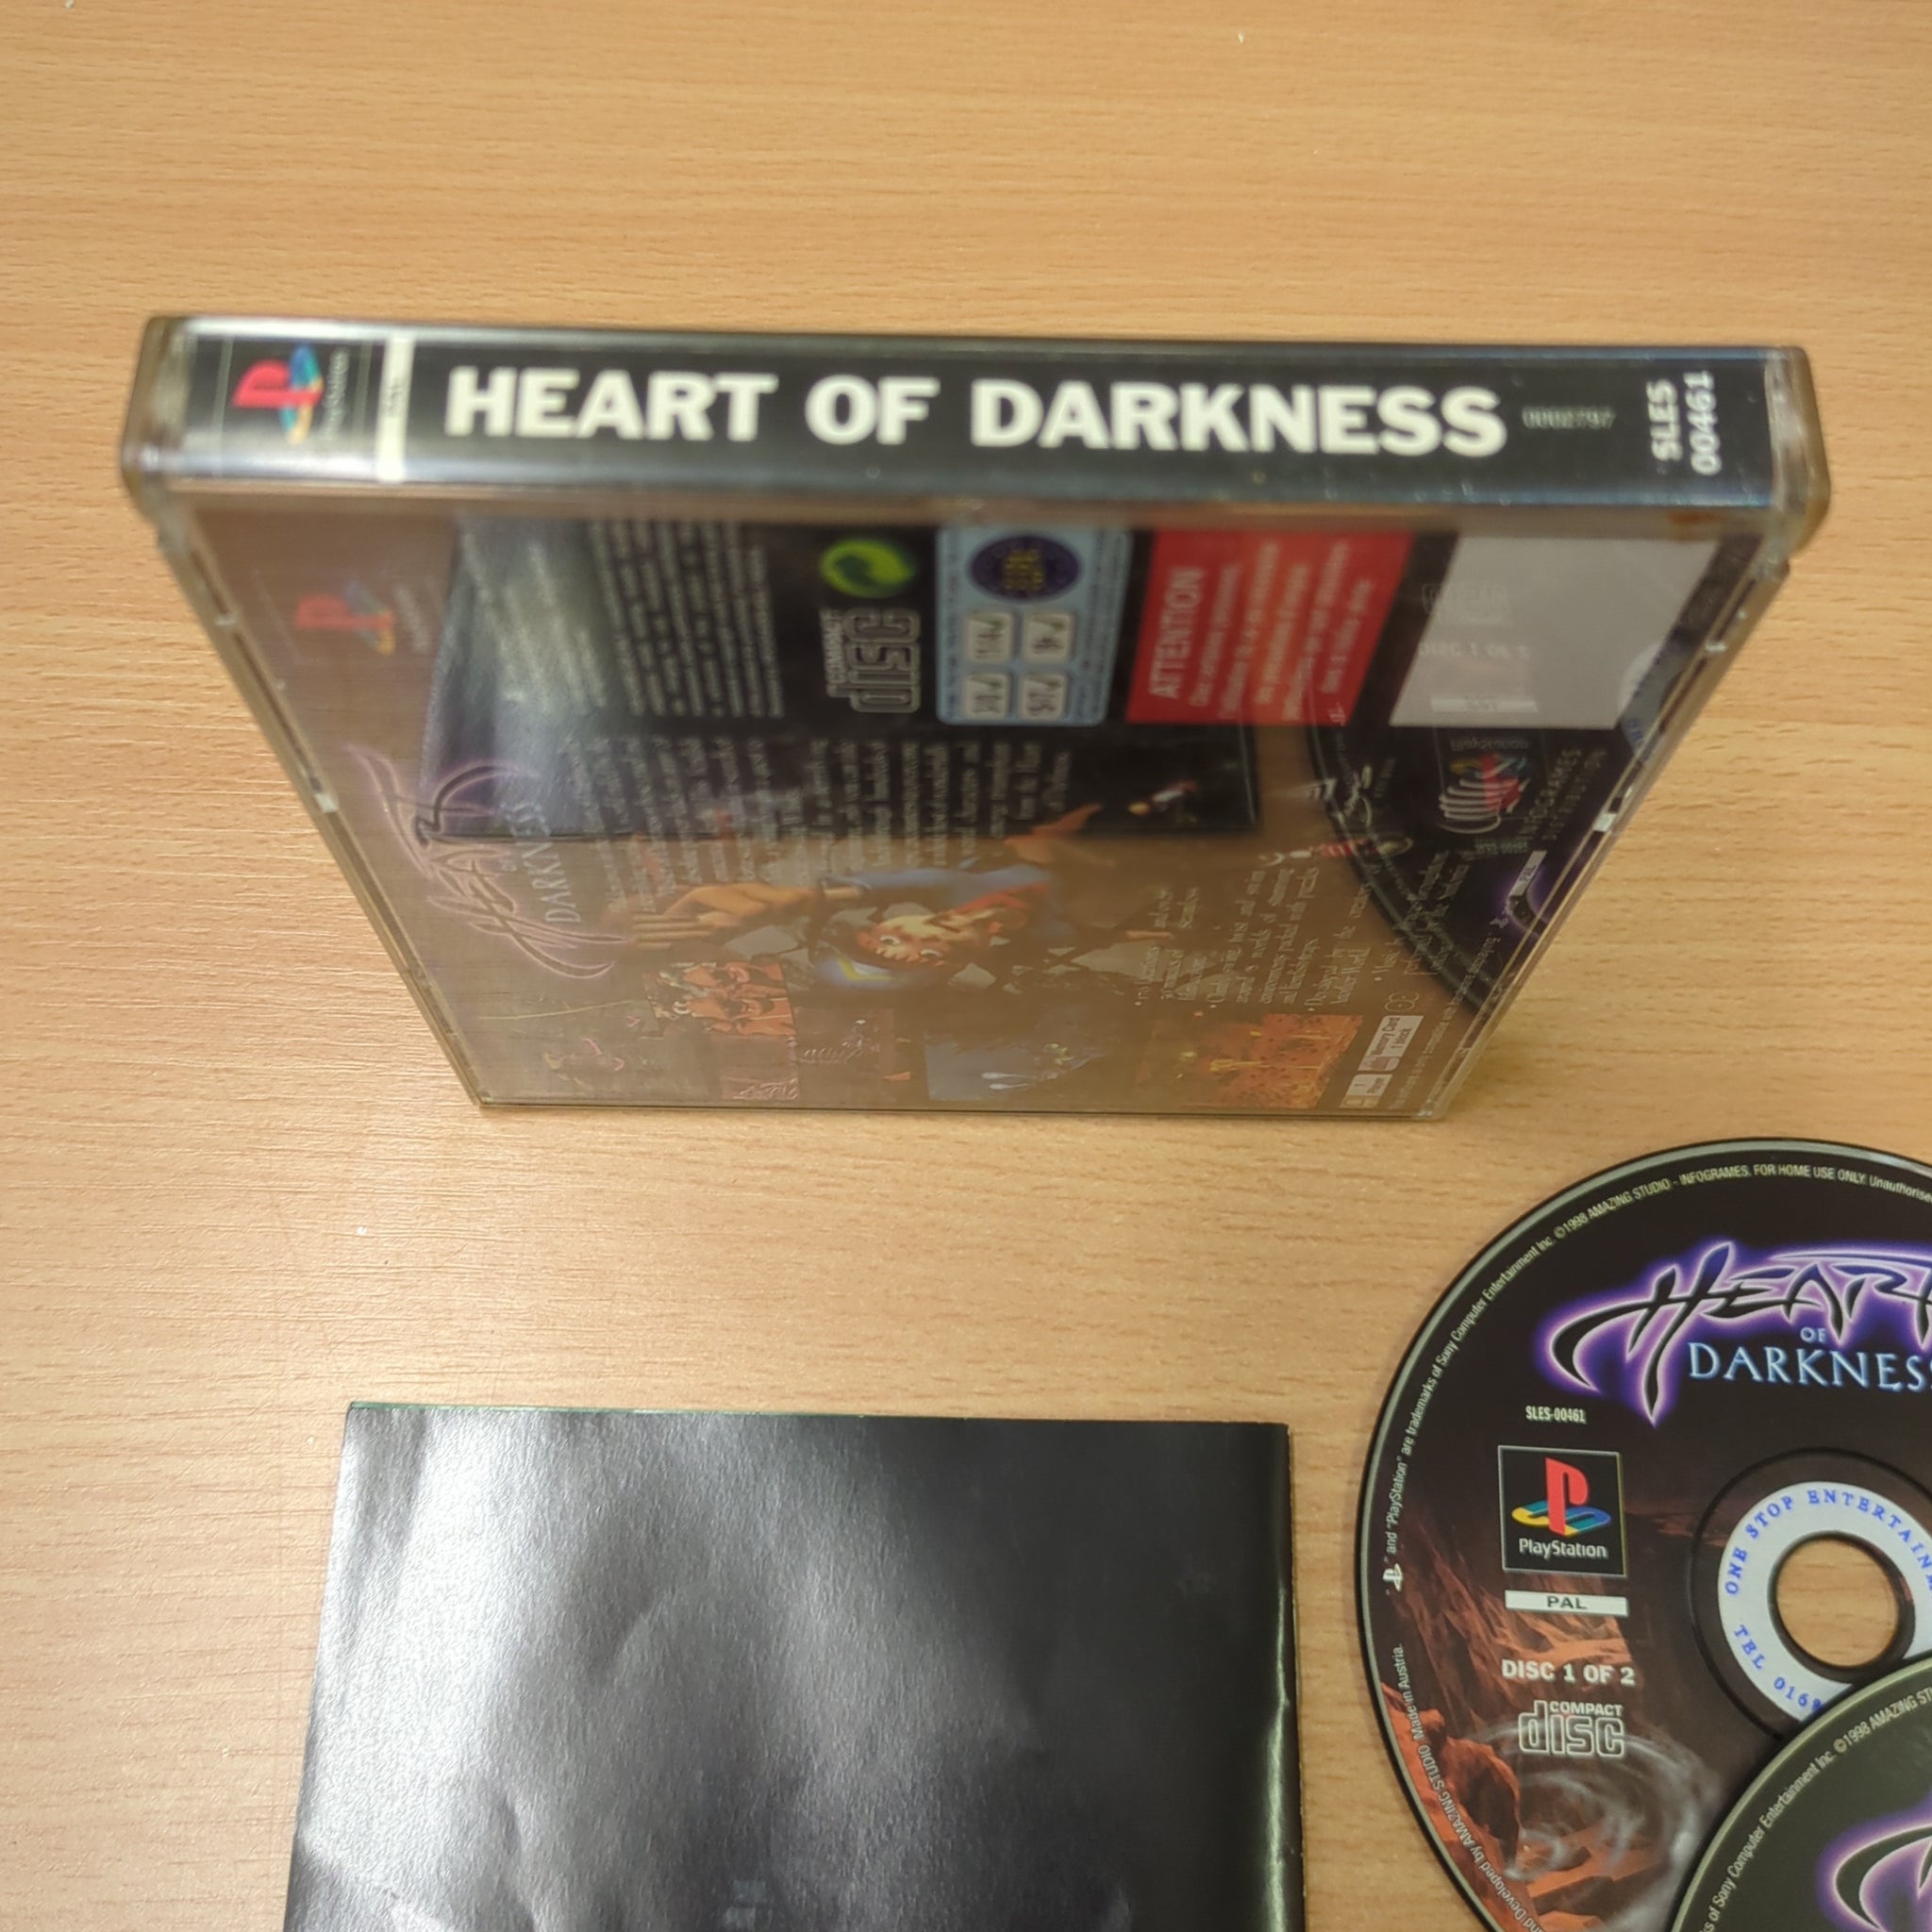 Heart of Darkness Sony PS1 game – retro game store uk - 8BitBeyond.com